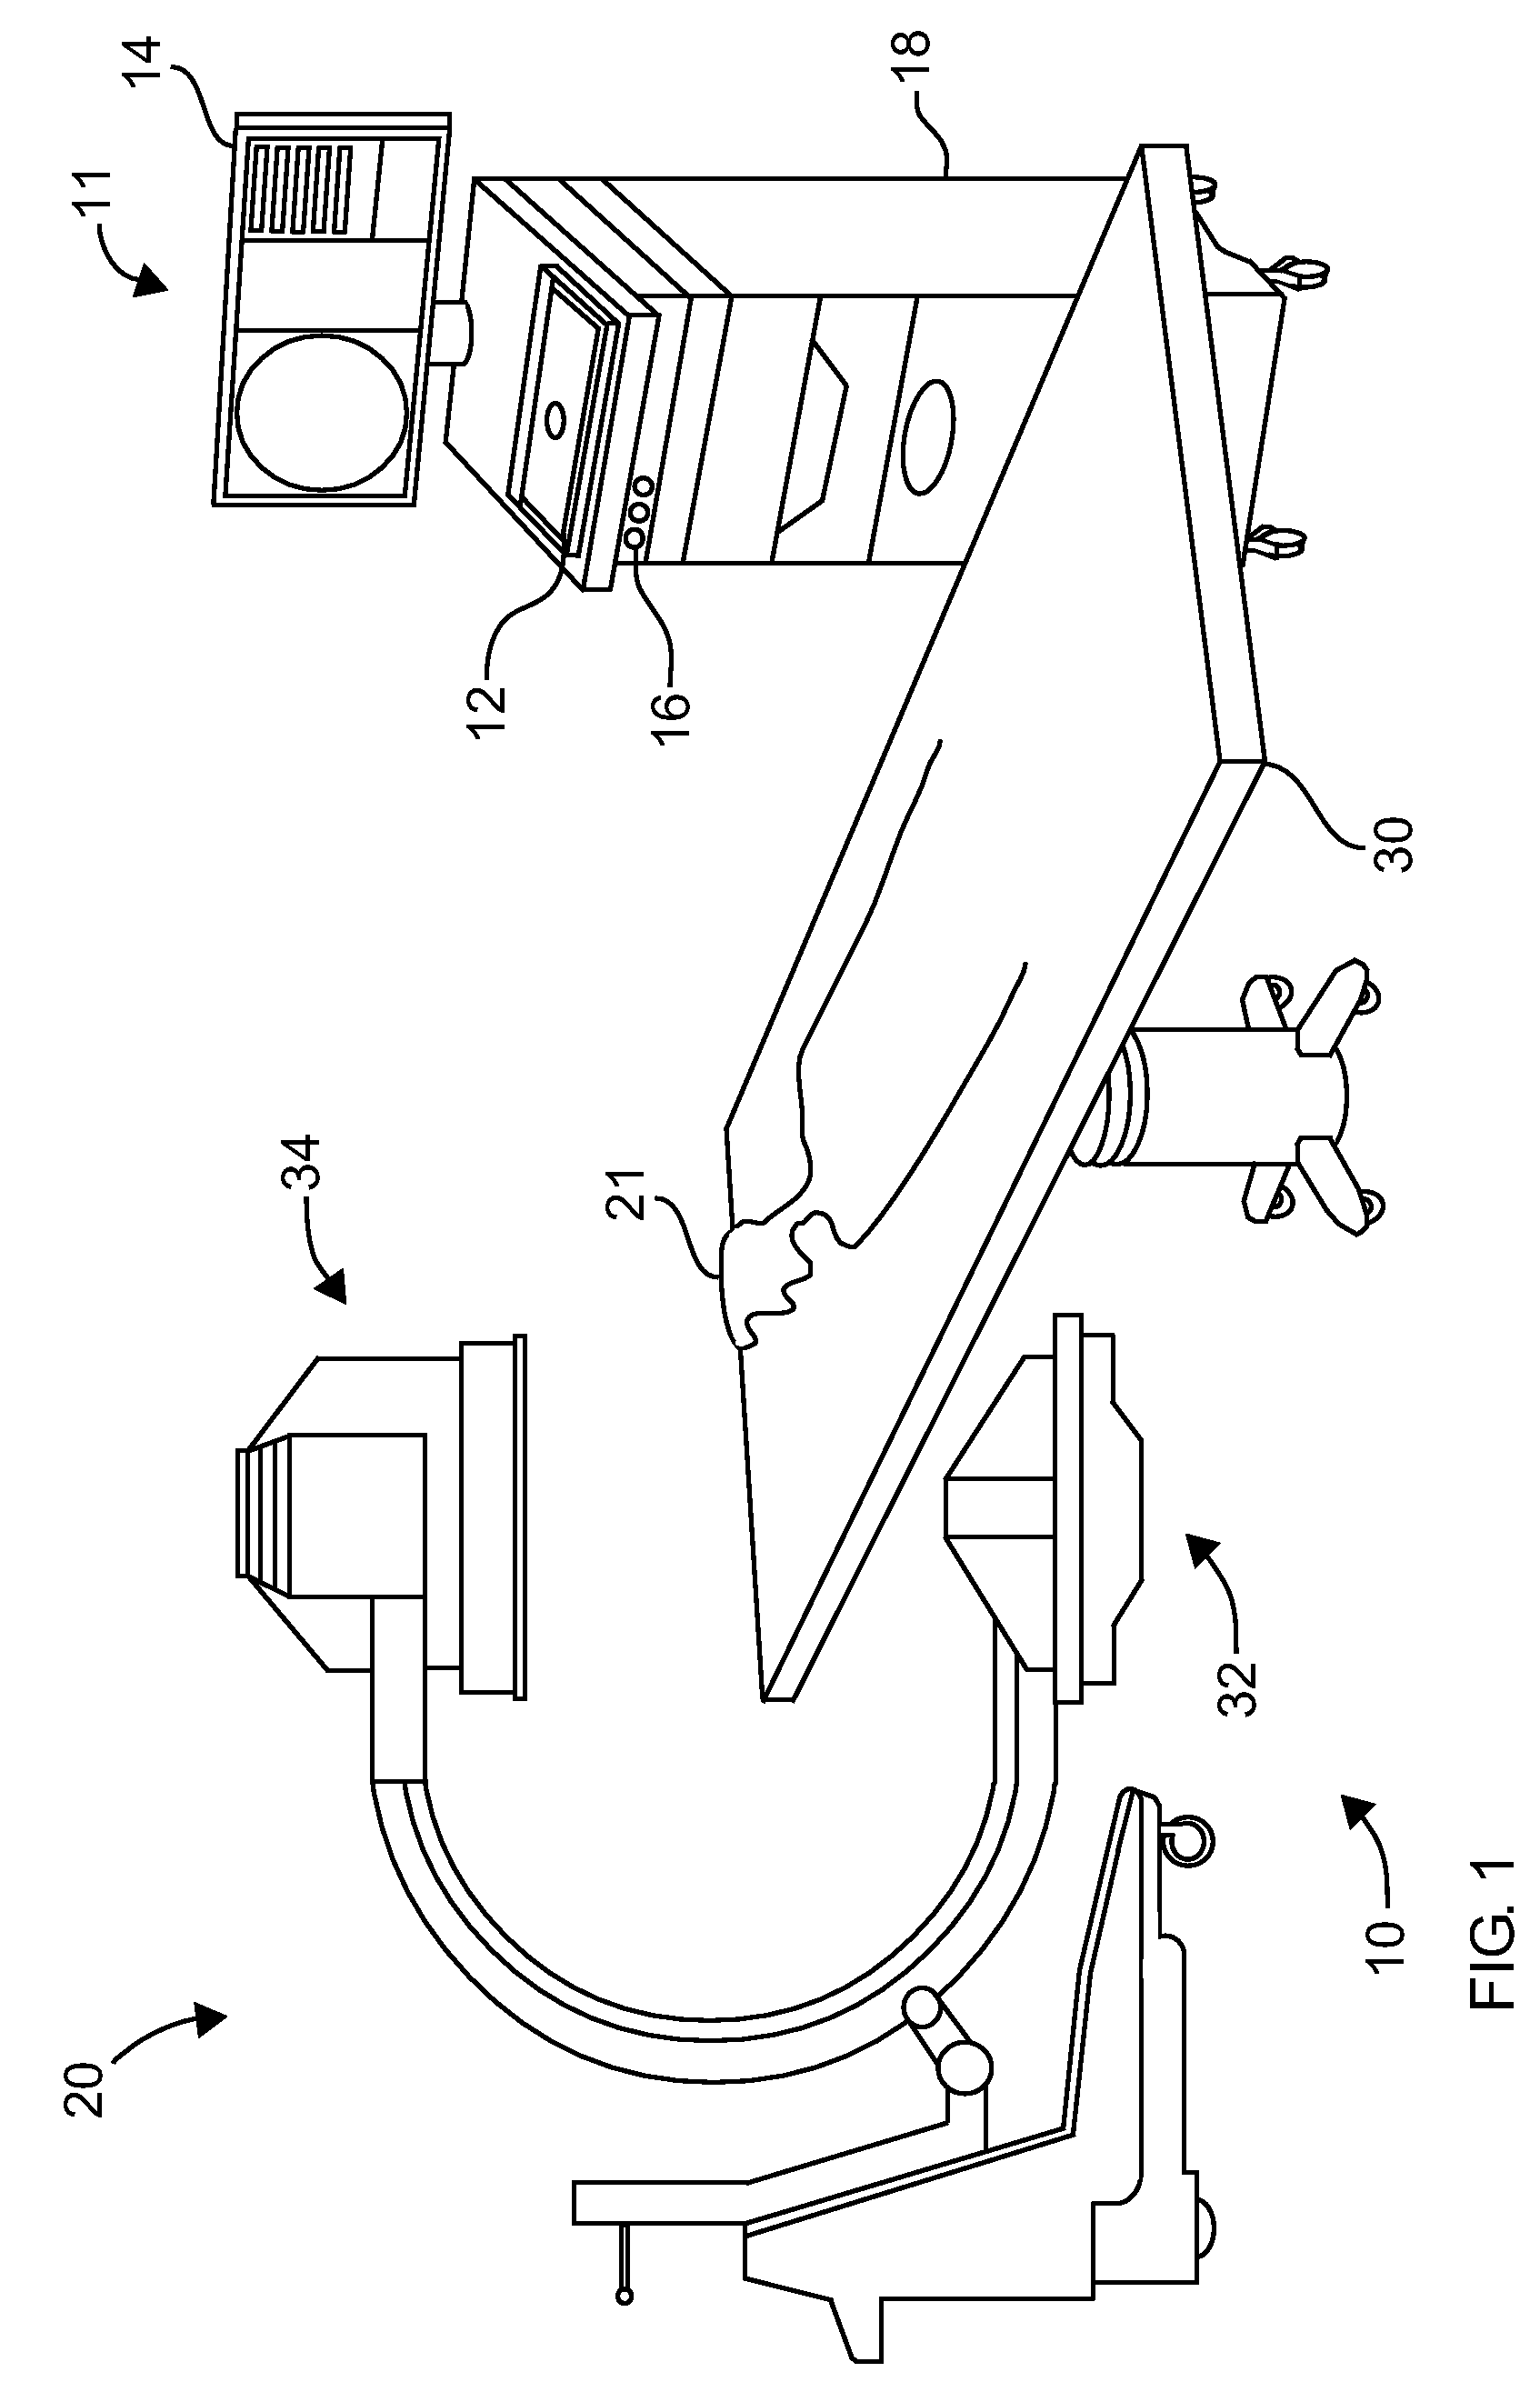 Systems and methods for communicating video data between a mobile imaging system and a fixed monitor system